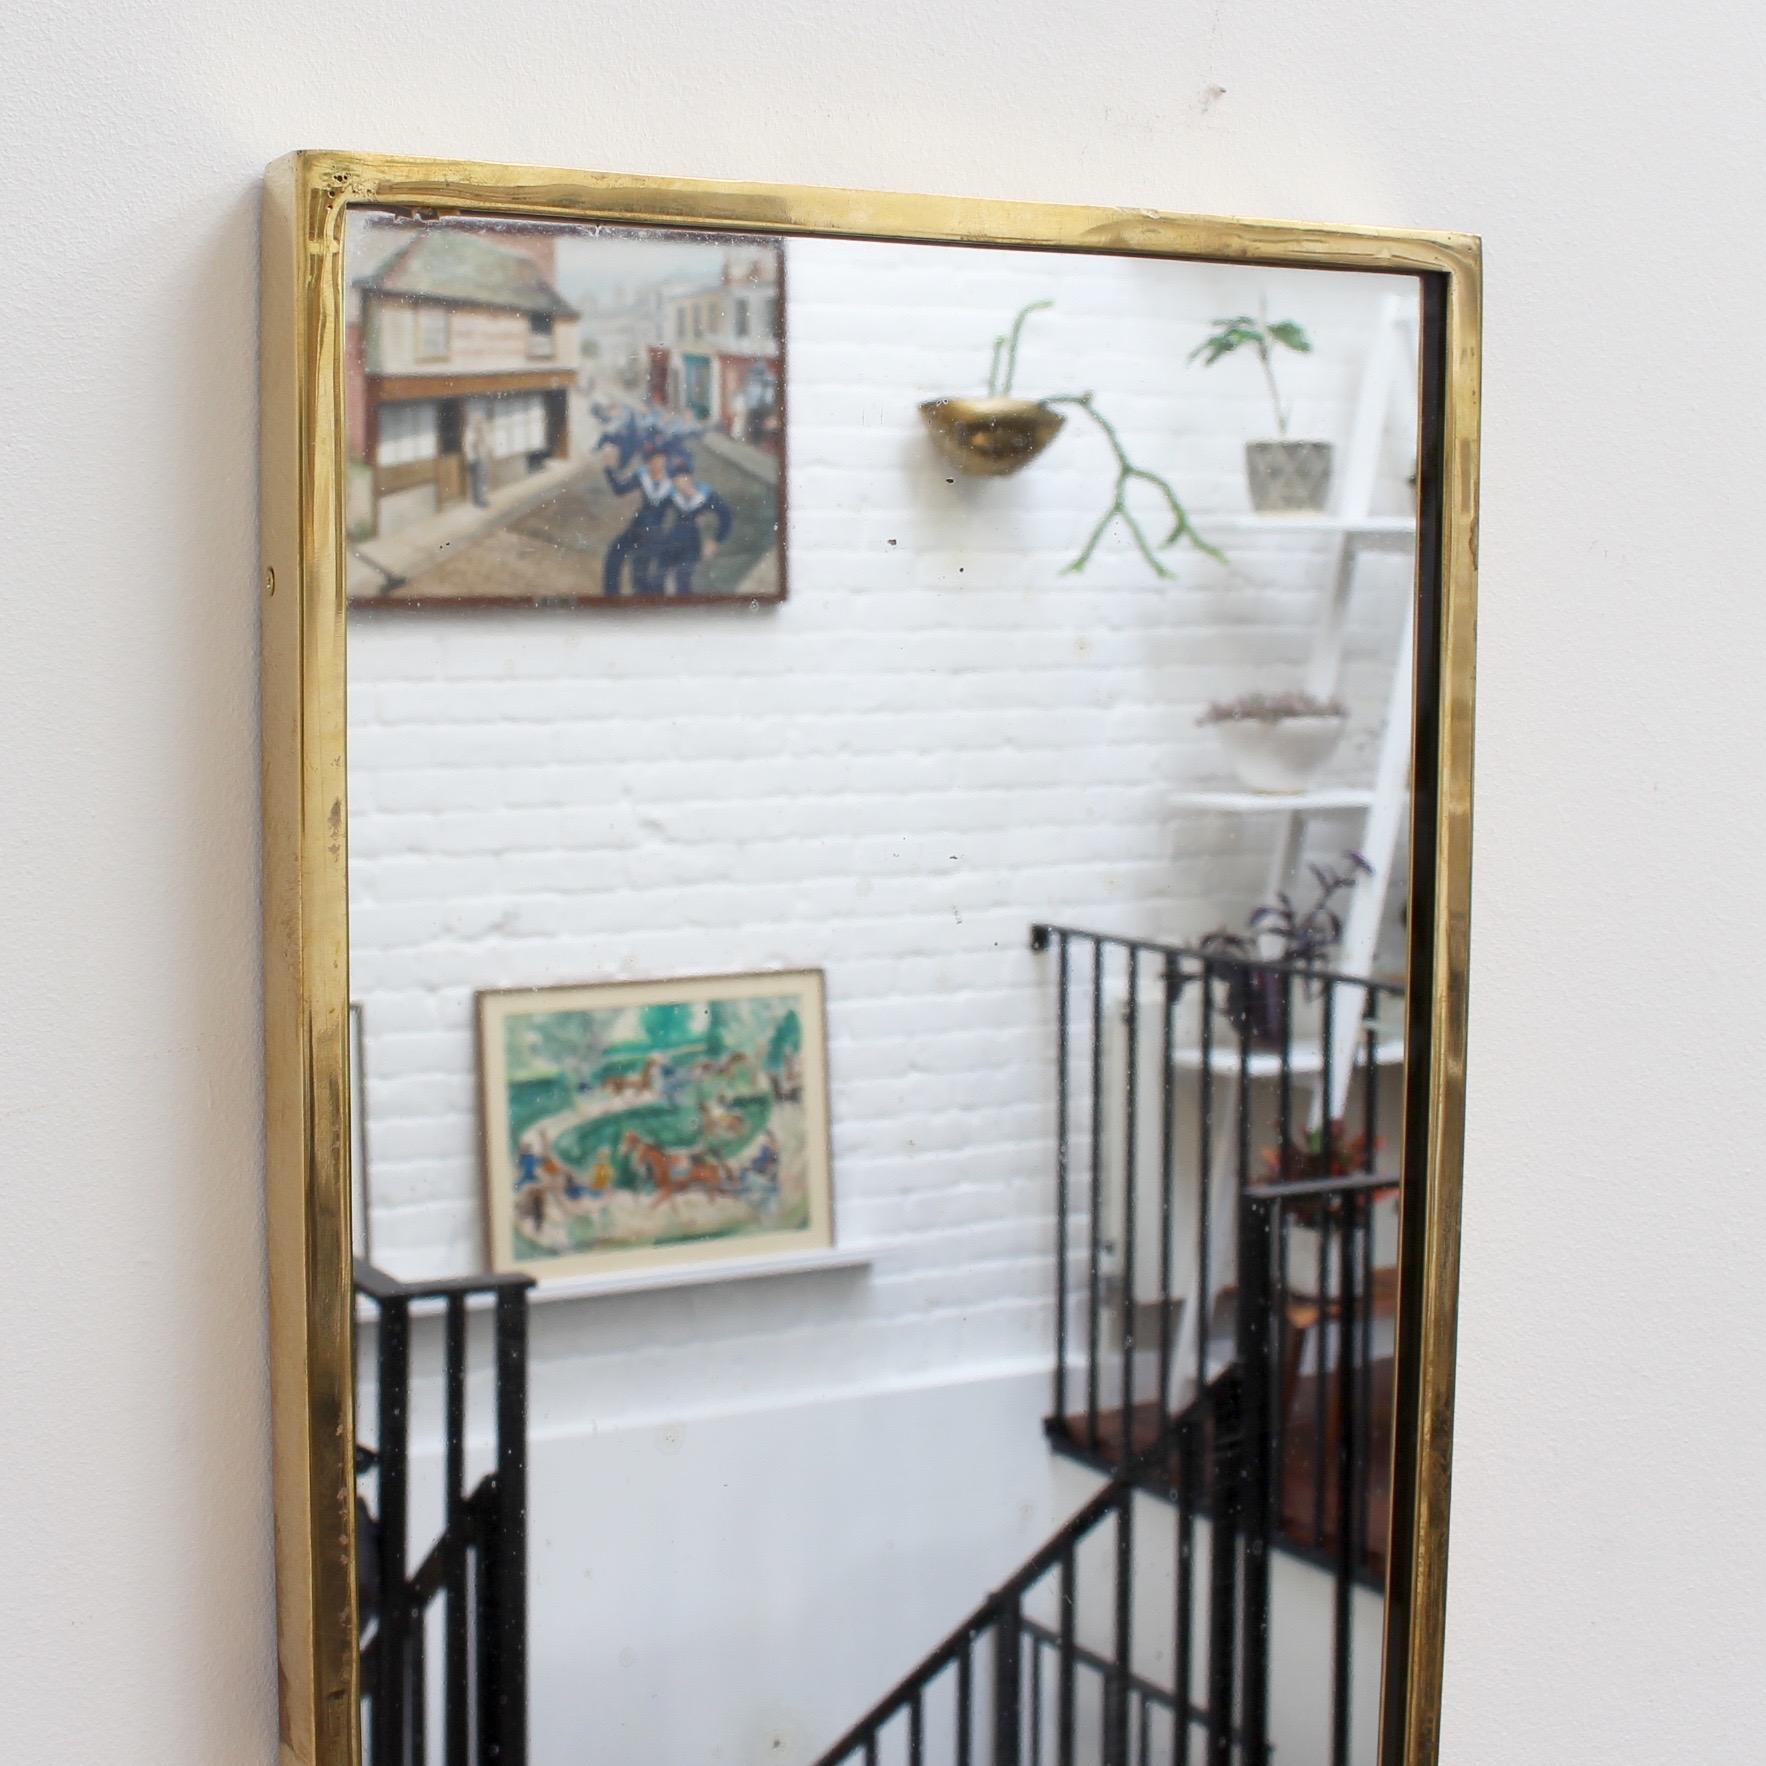 Midcentury Italian wall mirror with brass frame, circa 1950s. The mirror is crest-shaped - classically elegant and distinctive in a modern Gio Ponti style. This mirror is in very good vintage condition. There are some evident but characterful